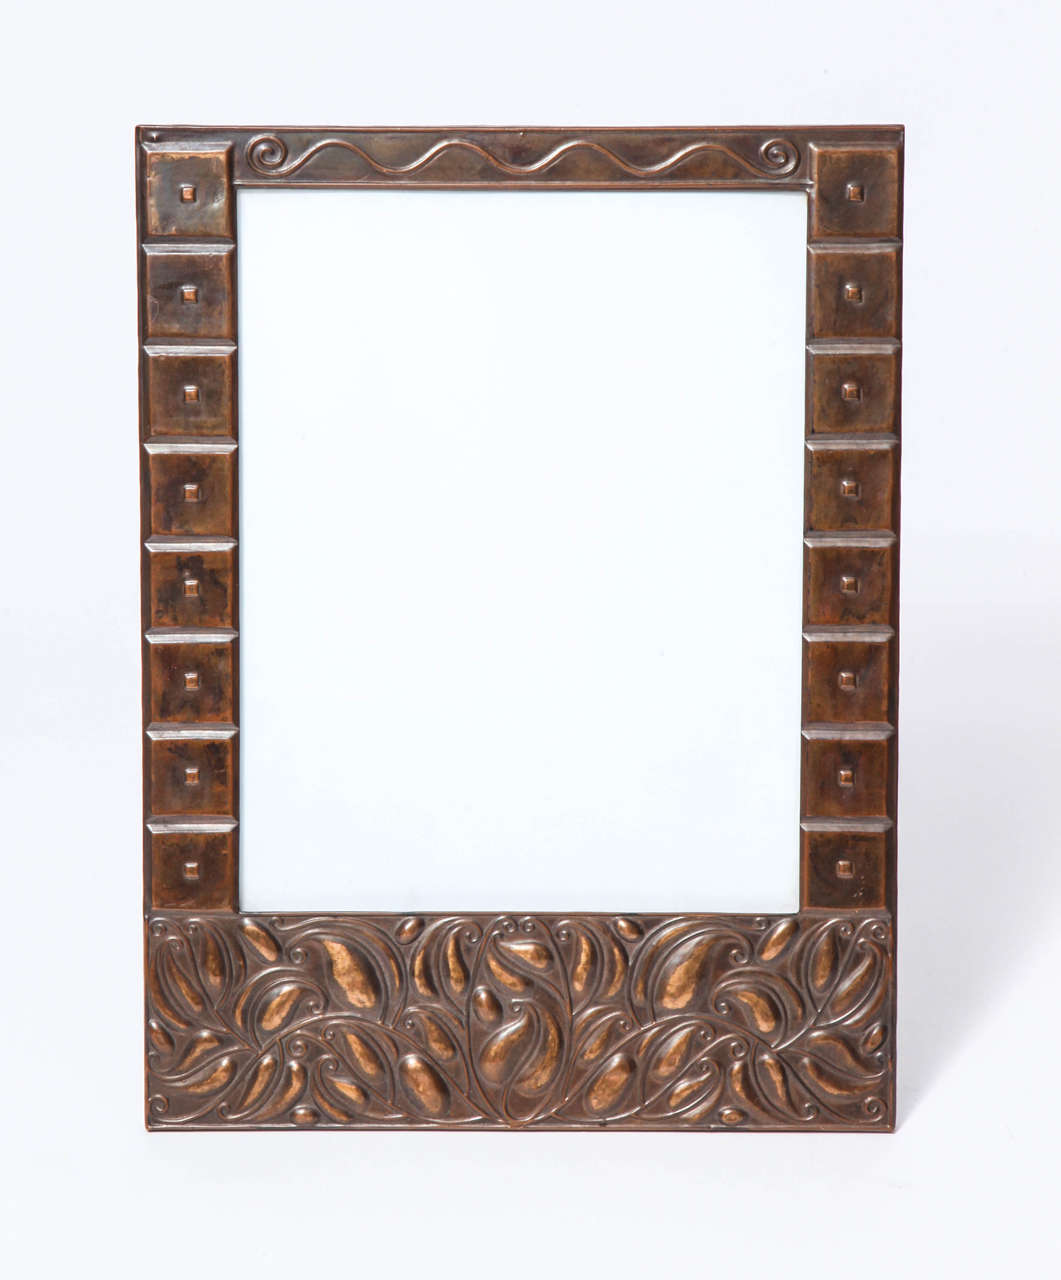 Highly Stylized hand-hammered copper frame with raised secessionist leaves and flowers on the bottom panel and raised geometric designs on the side panels and raised stylized top panel. The backside of the frame is finished as well. It can either be